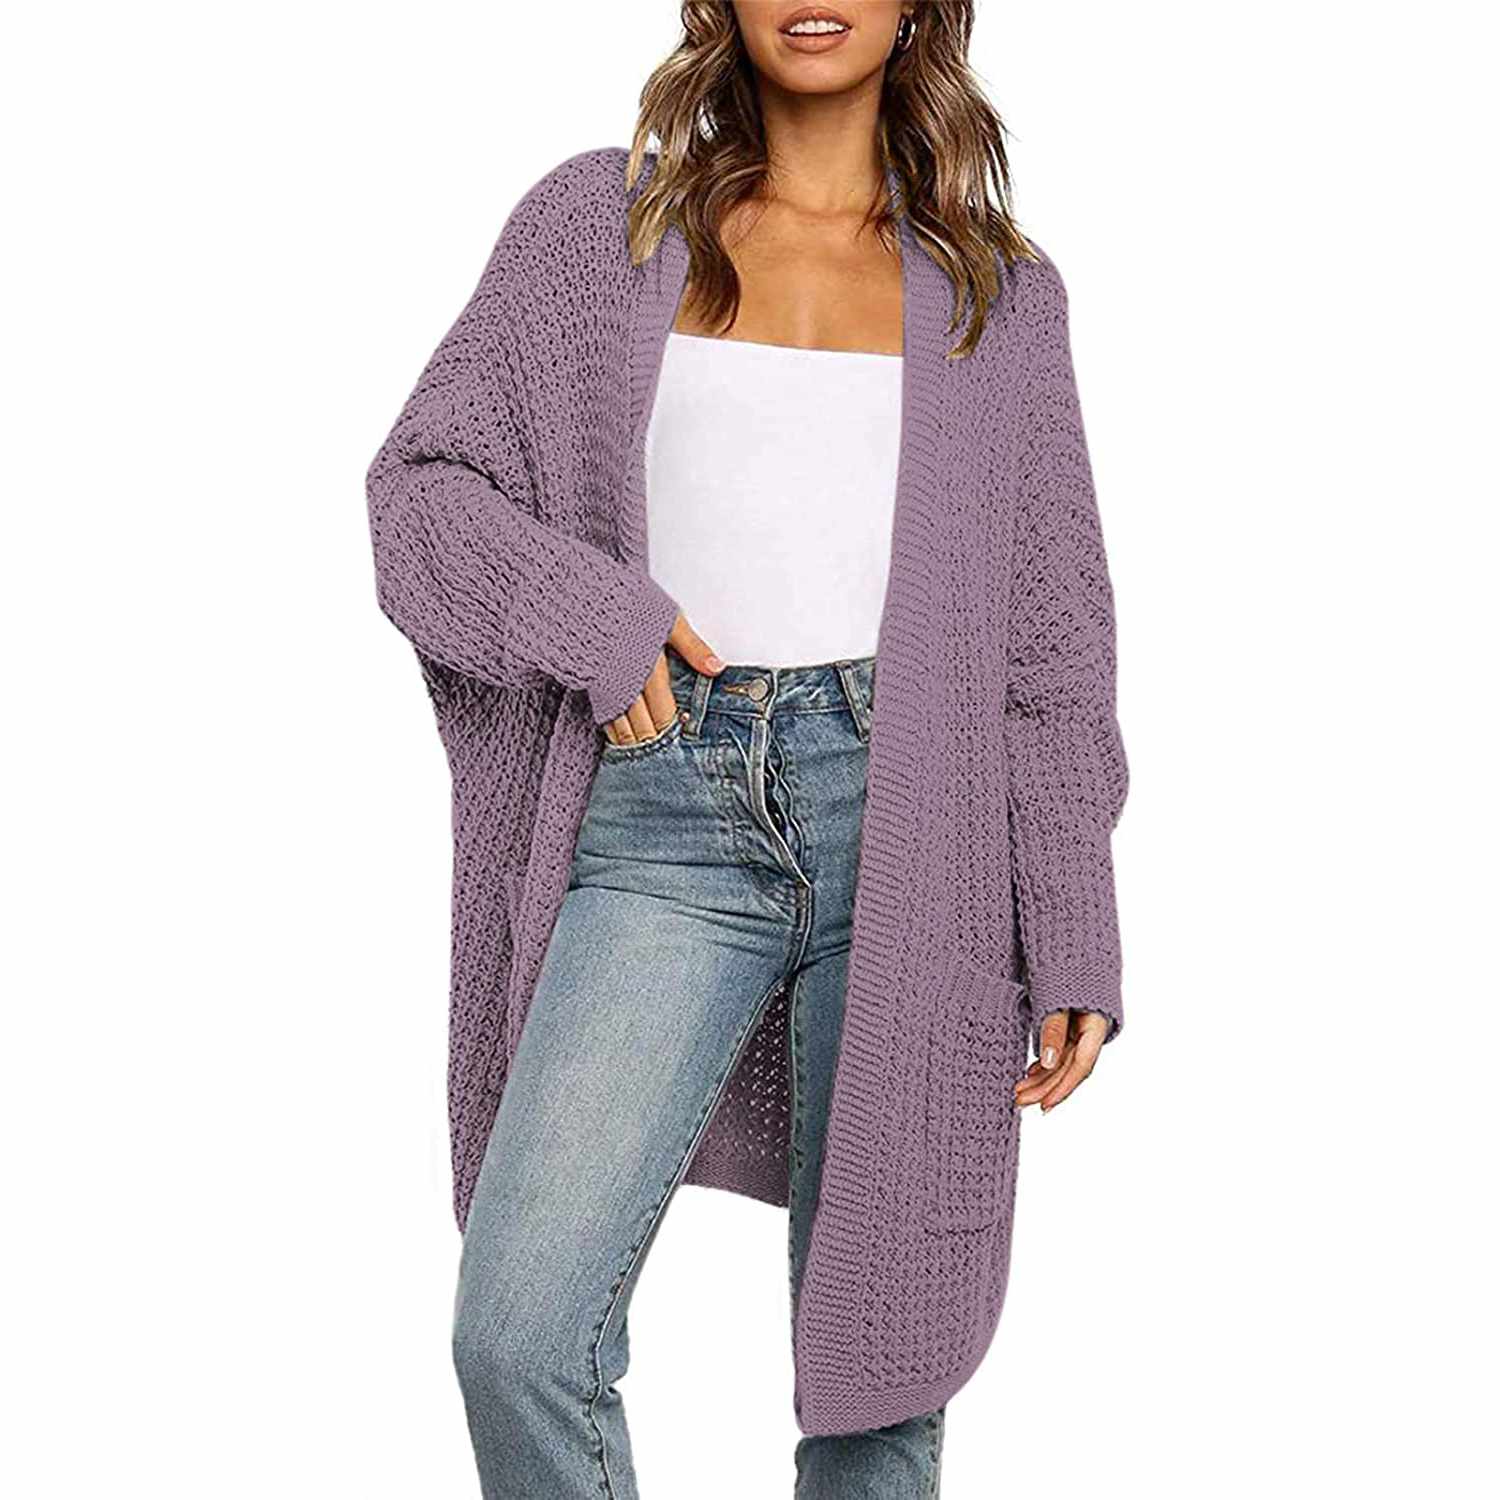 The Yibock Chunky Knit Cardigan with Pockets Is $32 on Amazon | PEOPLE.com